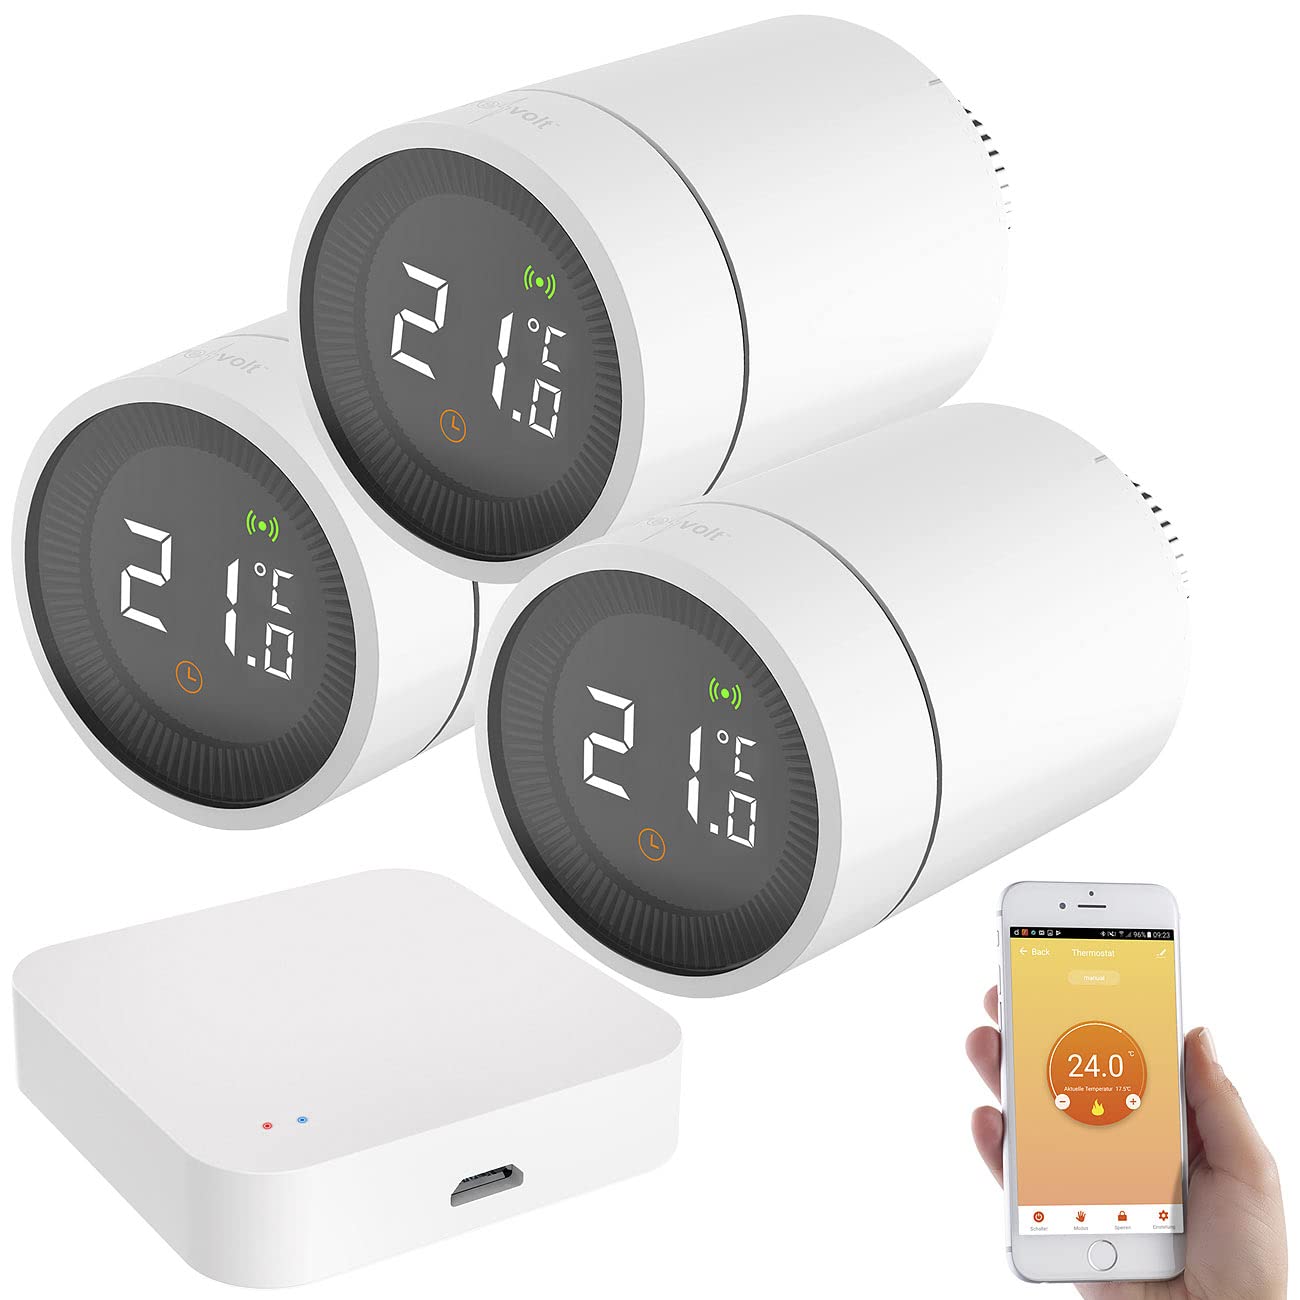 Introducing Ouellet Zigbee Smart Thermostats — DAD Sales